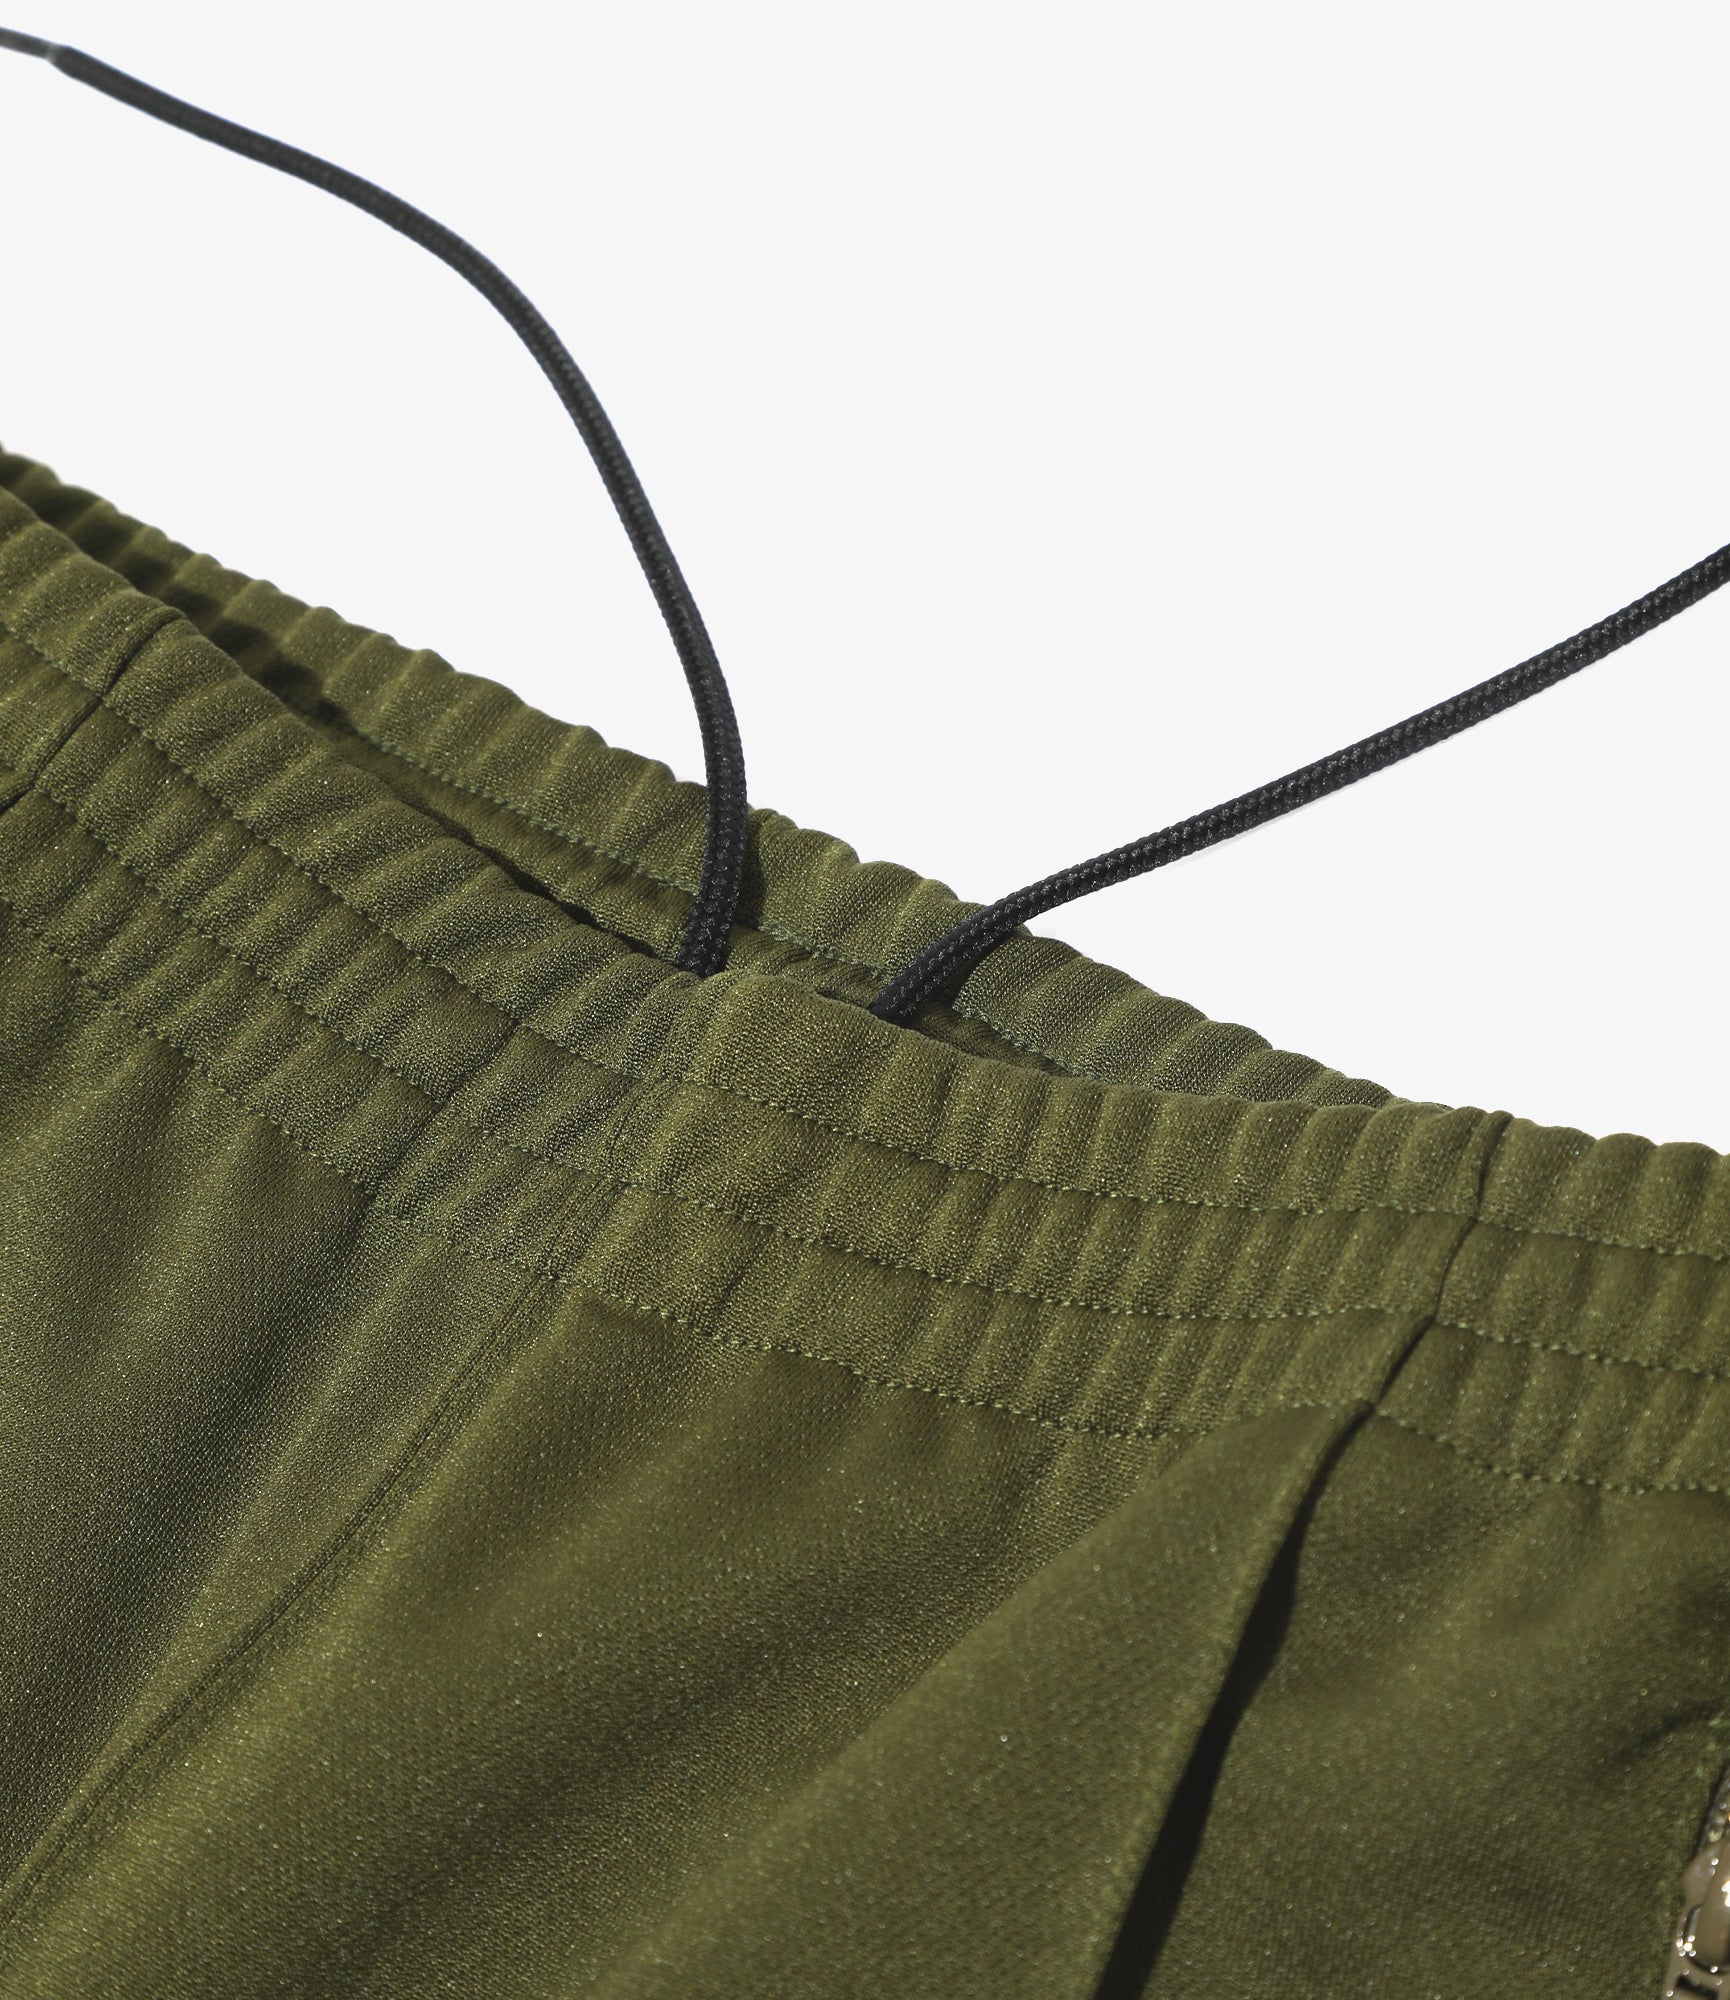 Boot-Cut Track Pant - Olive - Poly Smooth